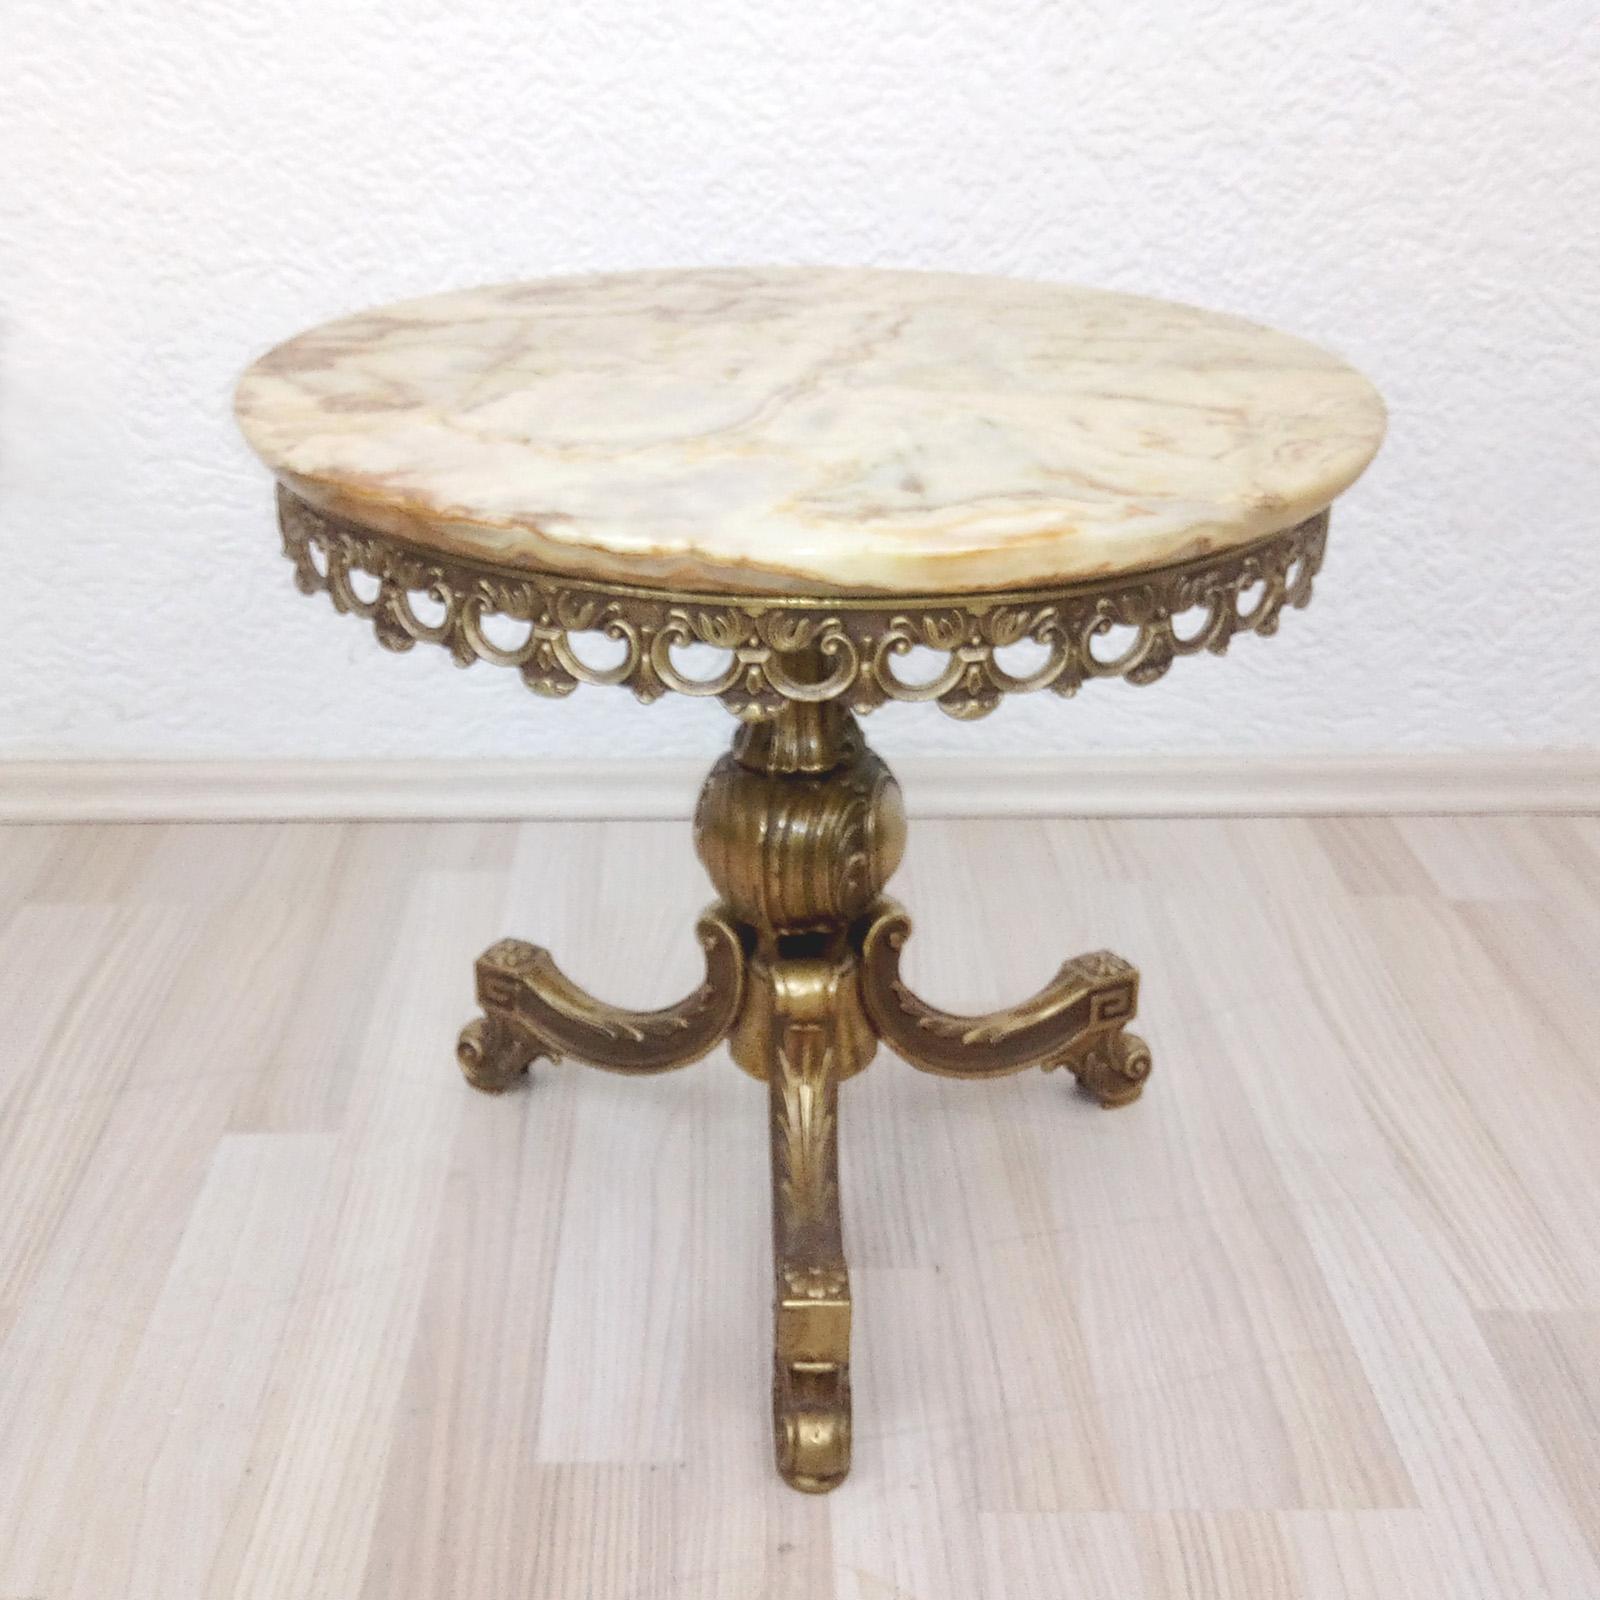 Neoclassical gueridon gilt metal foot and marble top.
Side table, gueridon, coffee table, gilt cast metal tripod foot, yellowish round marble top. 
Good used condition, with normal wear. Vintage from the 20th century.

Dimensions:
Diameter 50